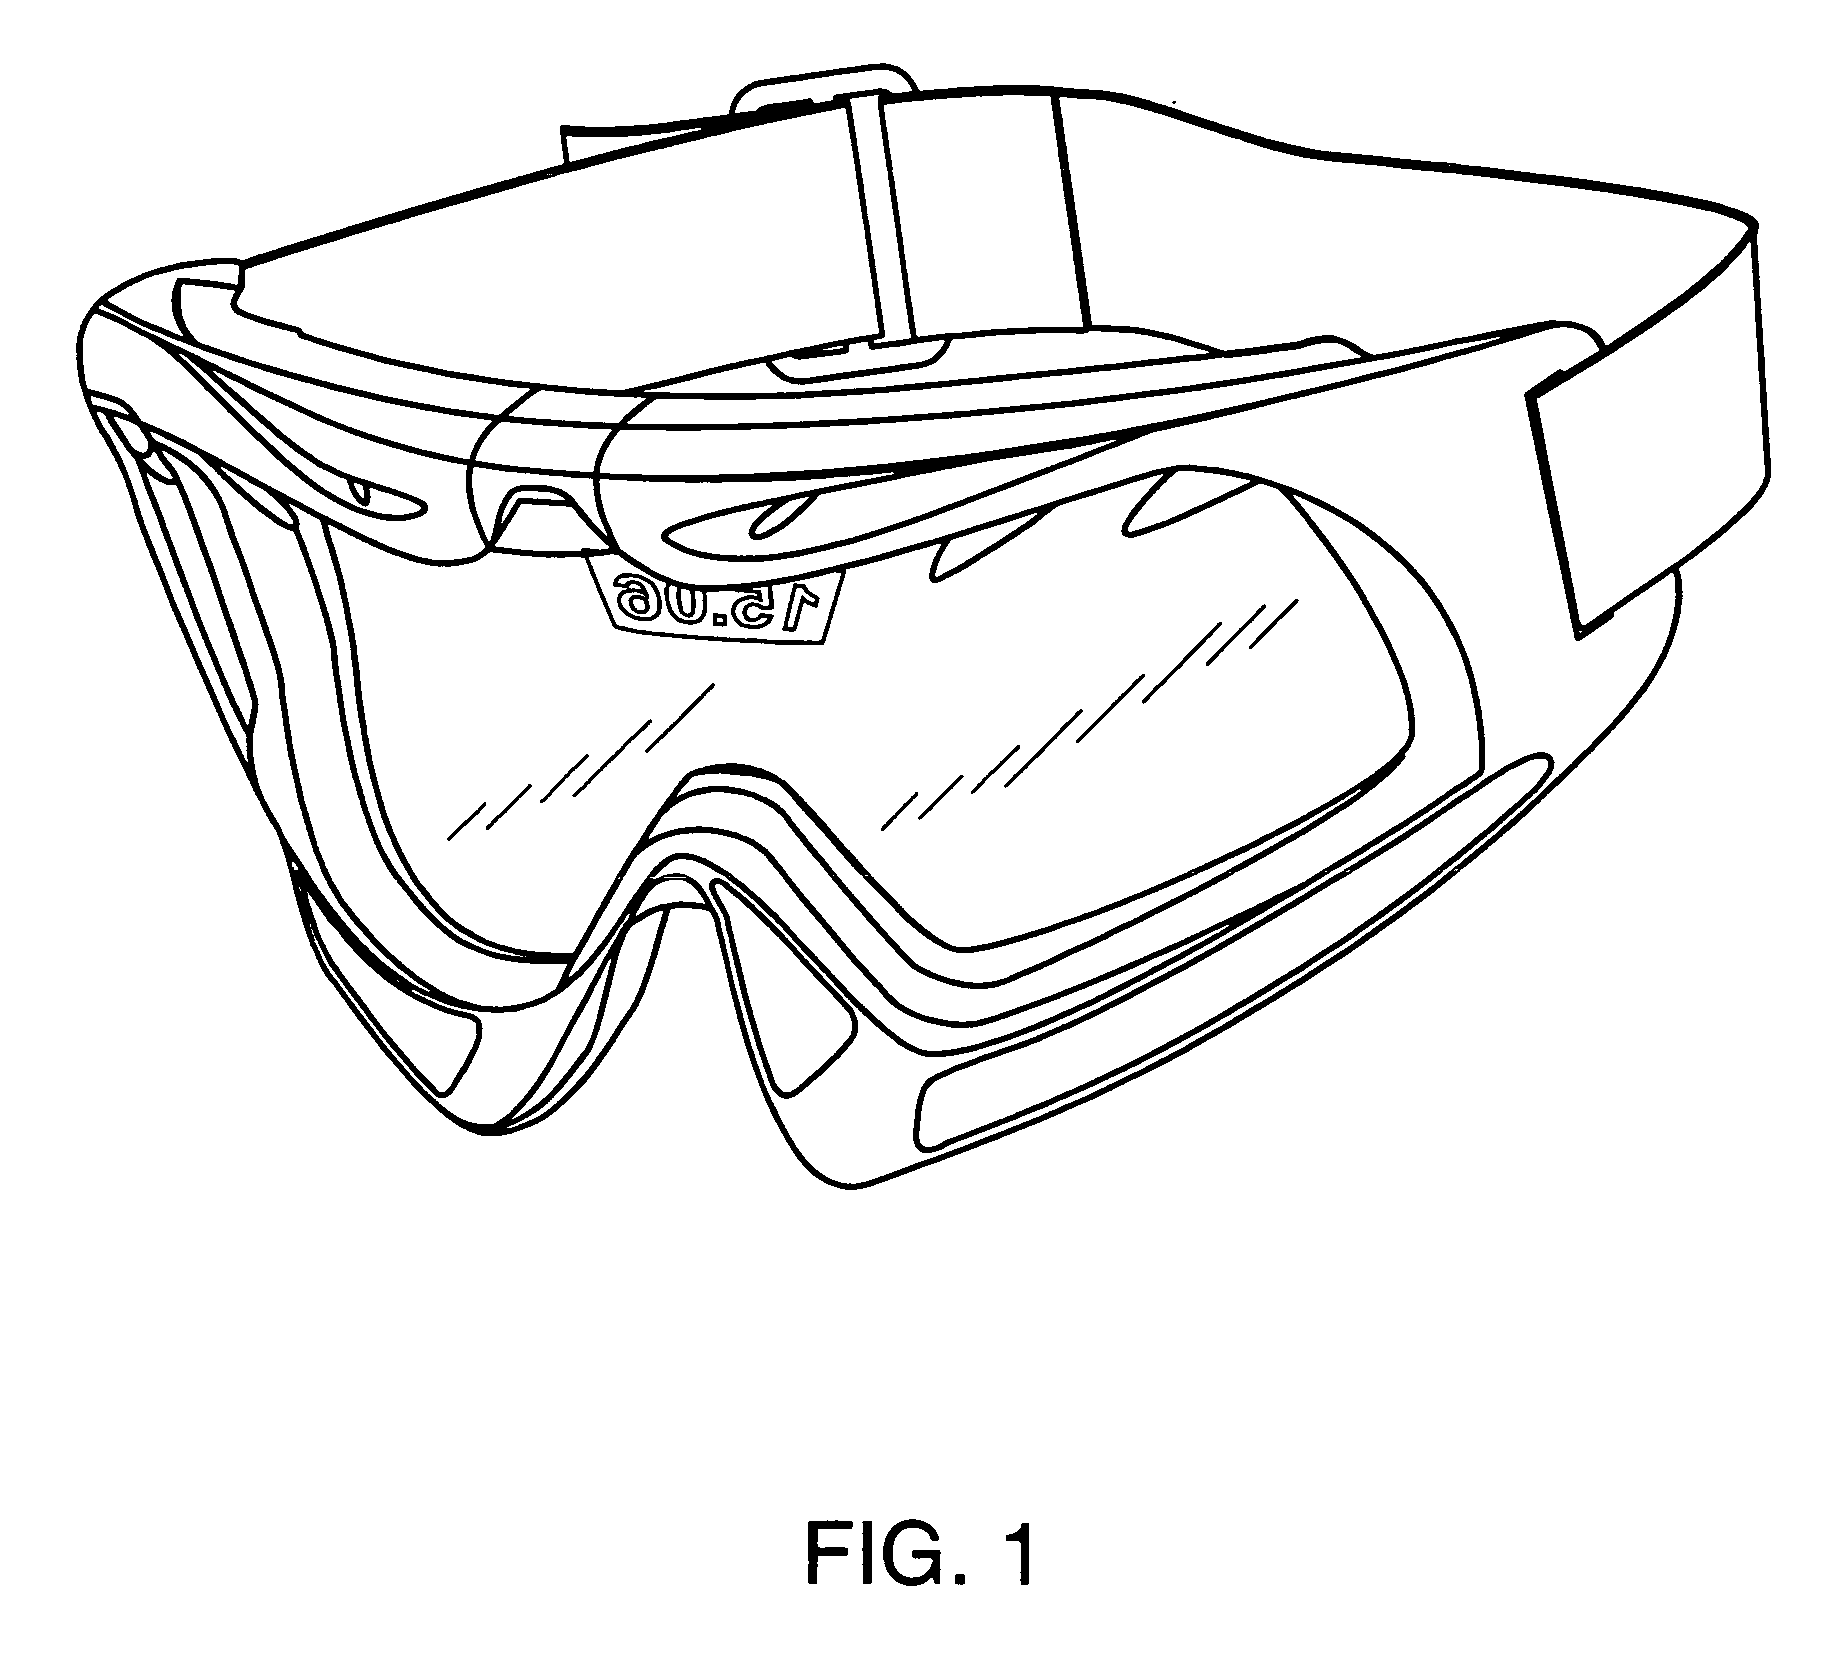 Method and apparatus for displaying images on reflective surfaces